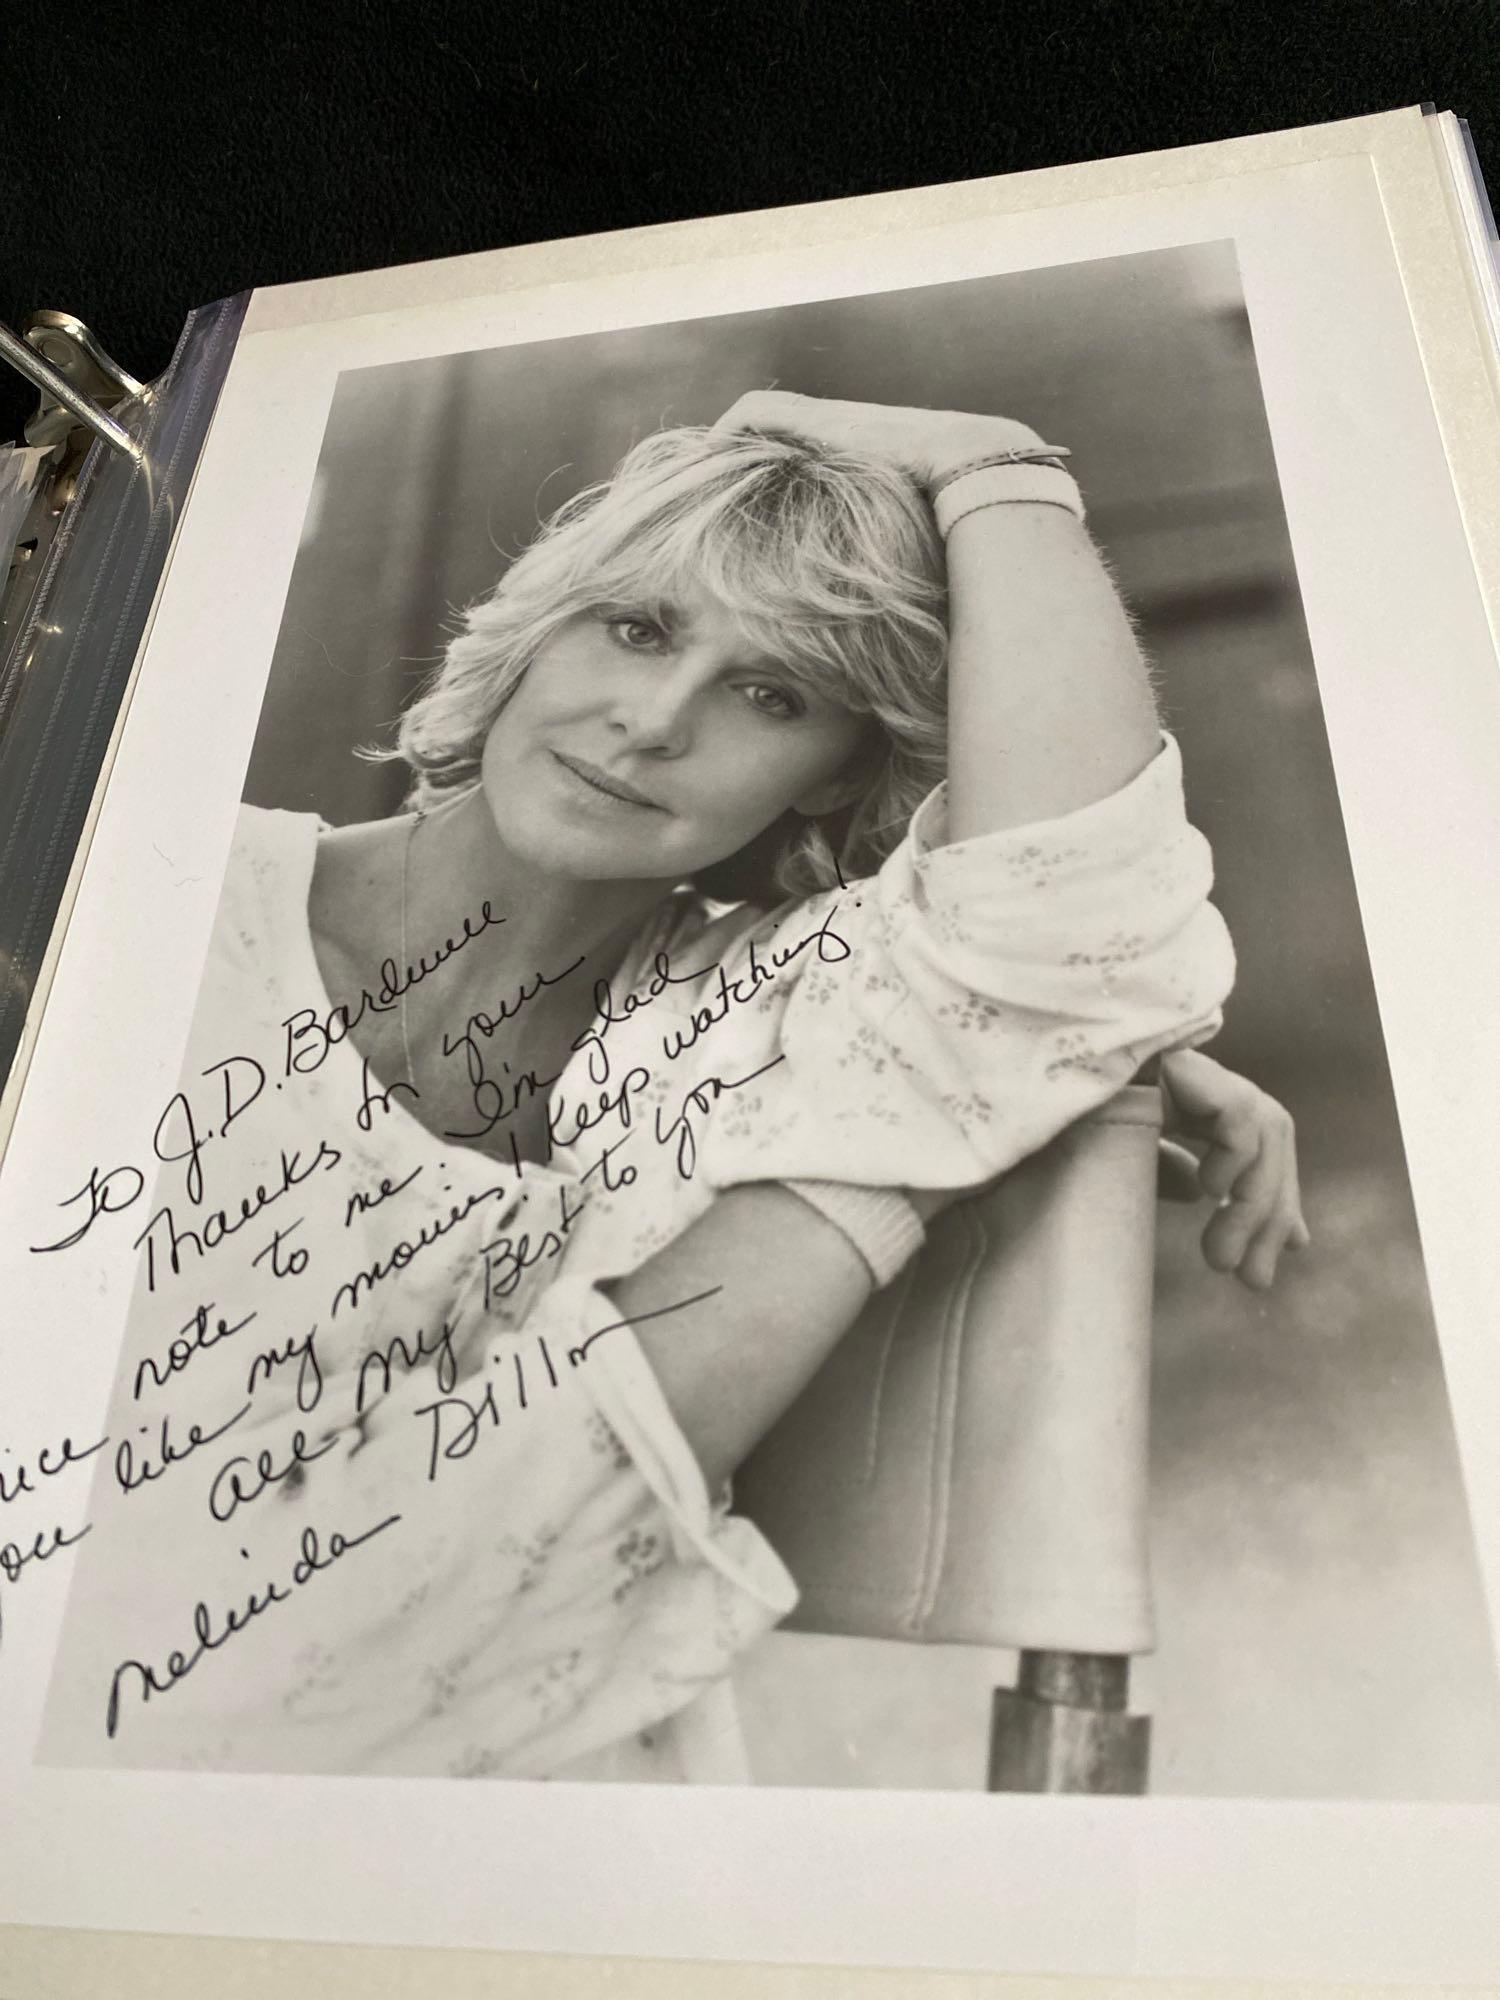 Five Celebrity Photos With Signatures